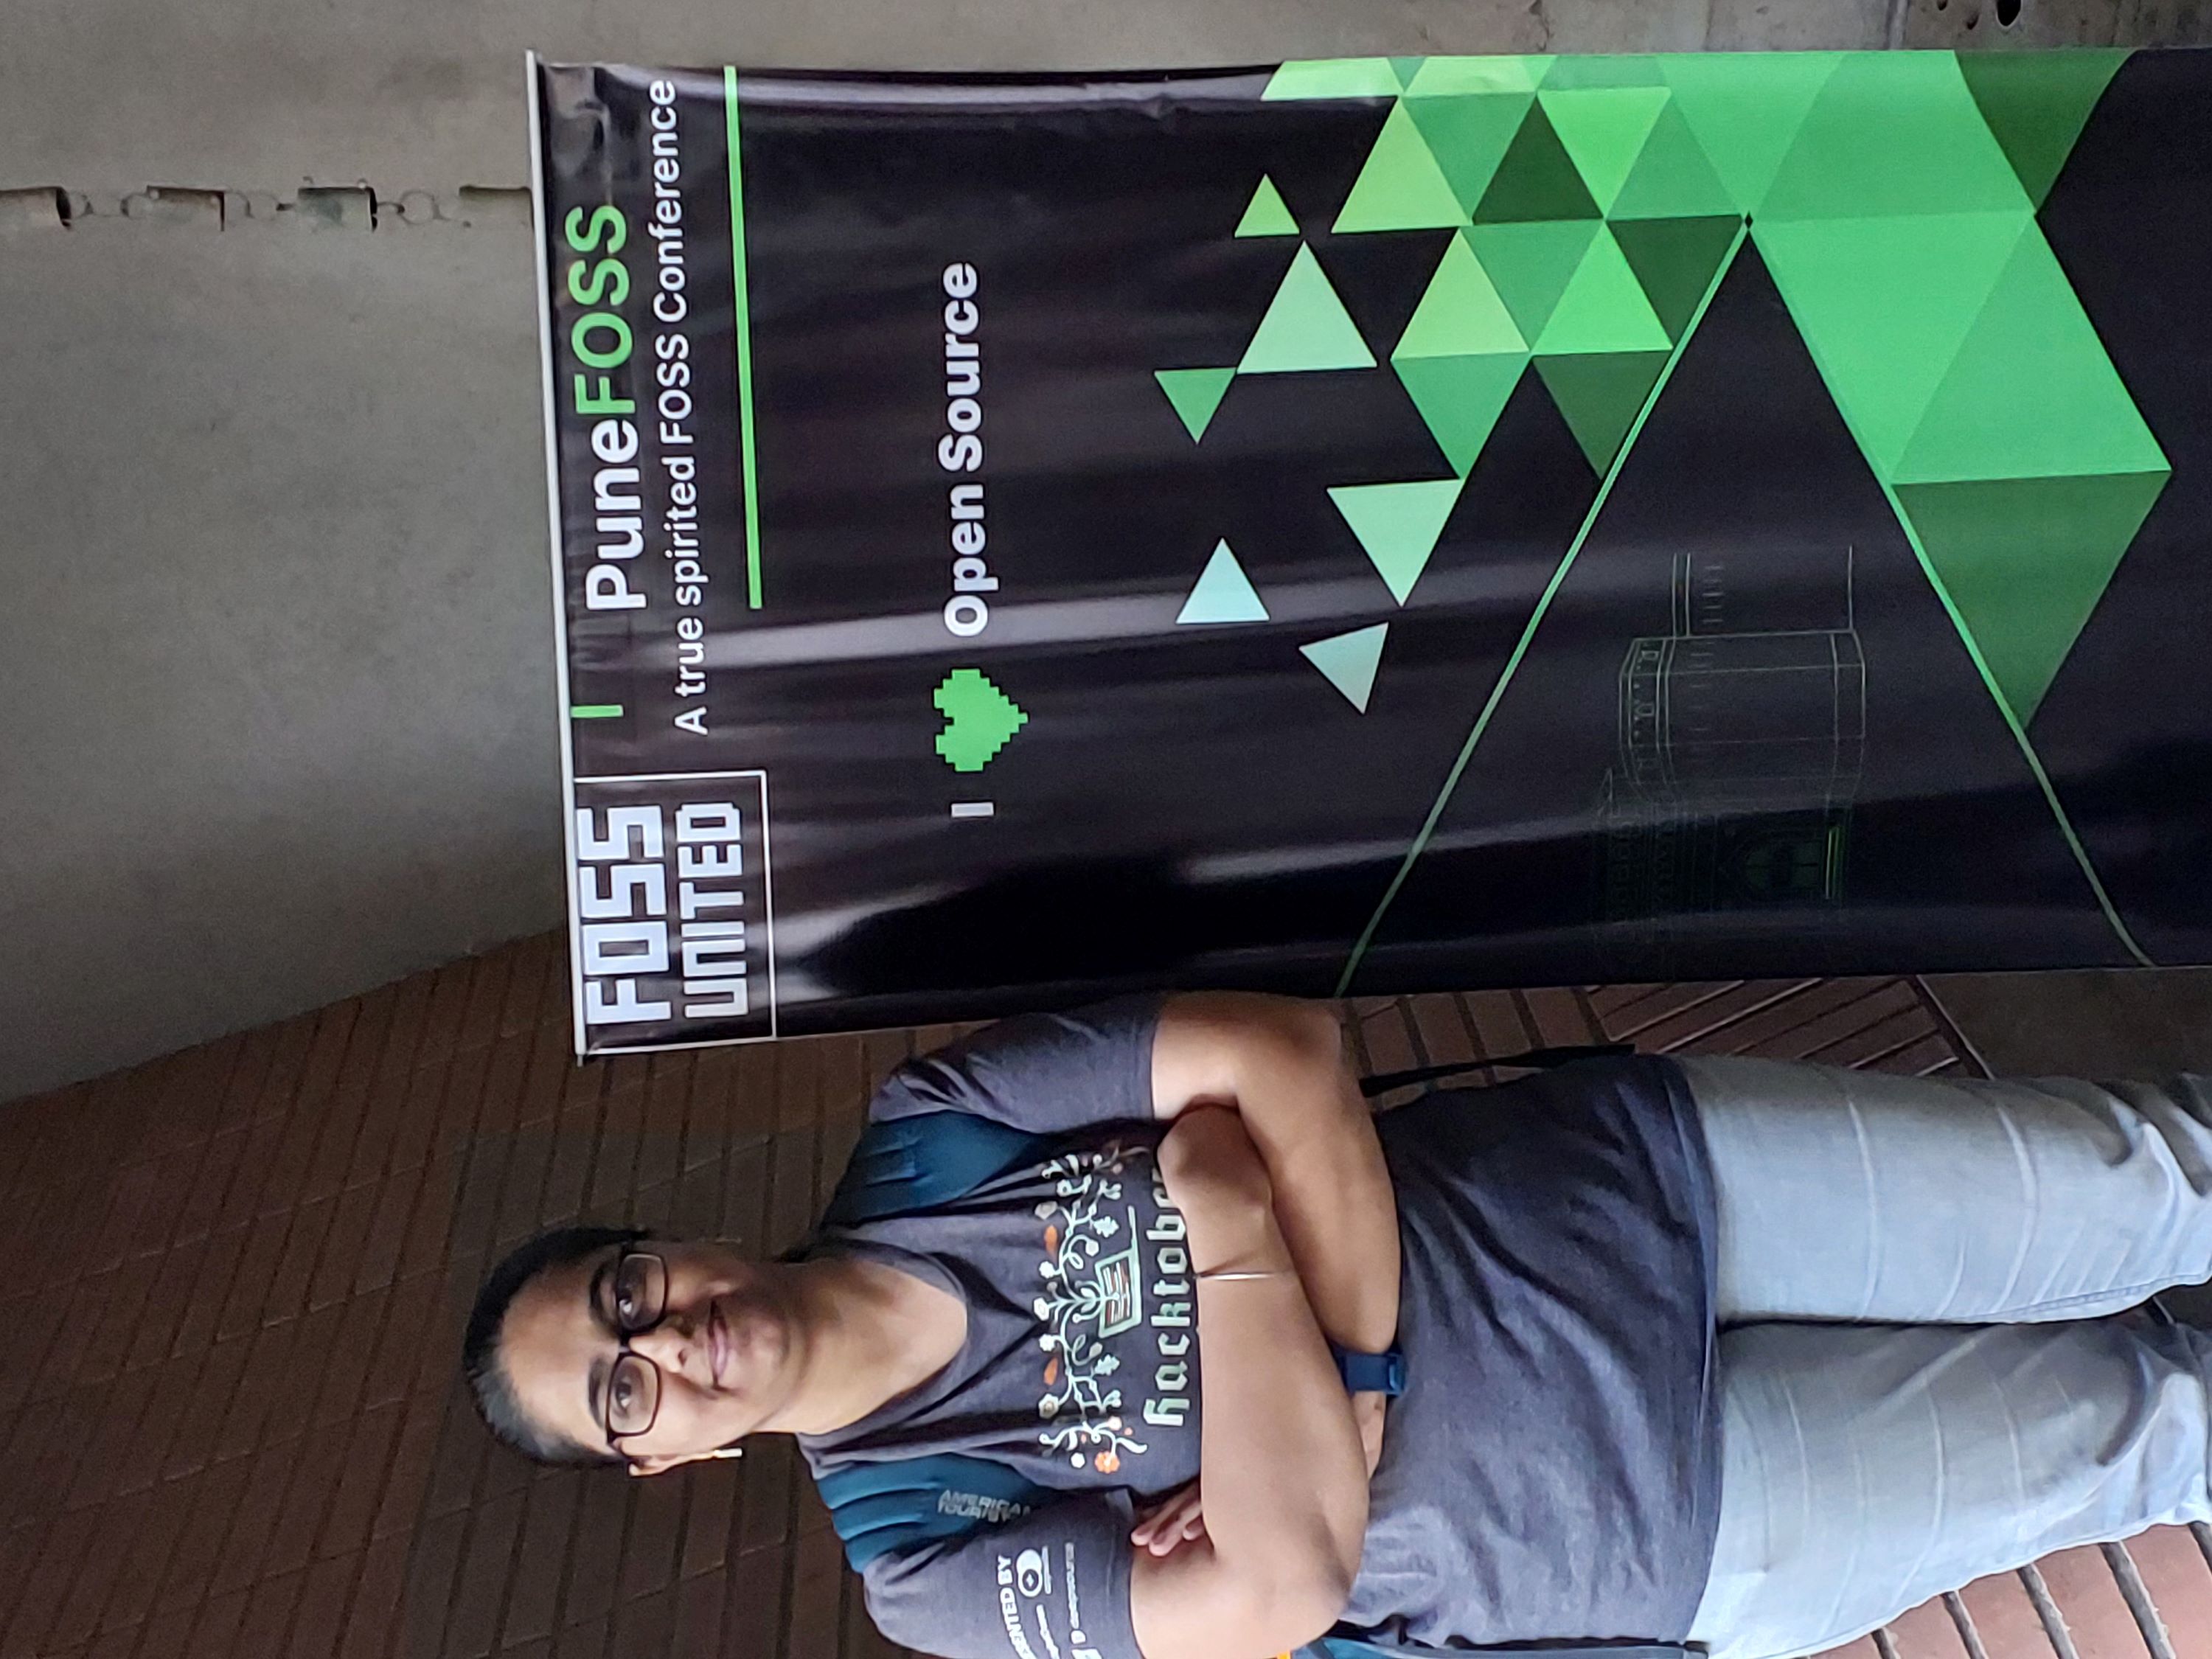 Picture of Jyoti Bhogal, the author of this blog, standing next to the Conference Poster at the PuneFOSS 2.0 event